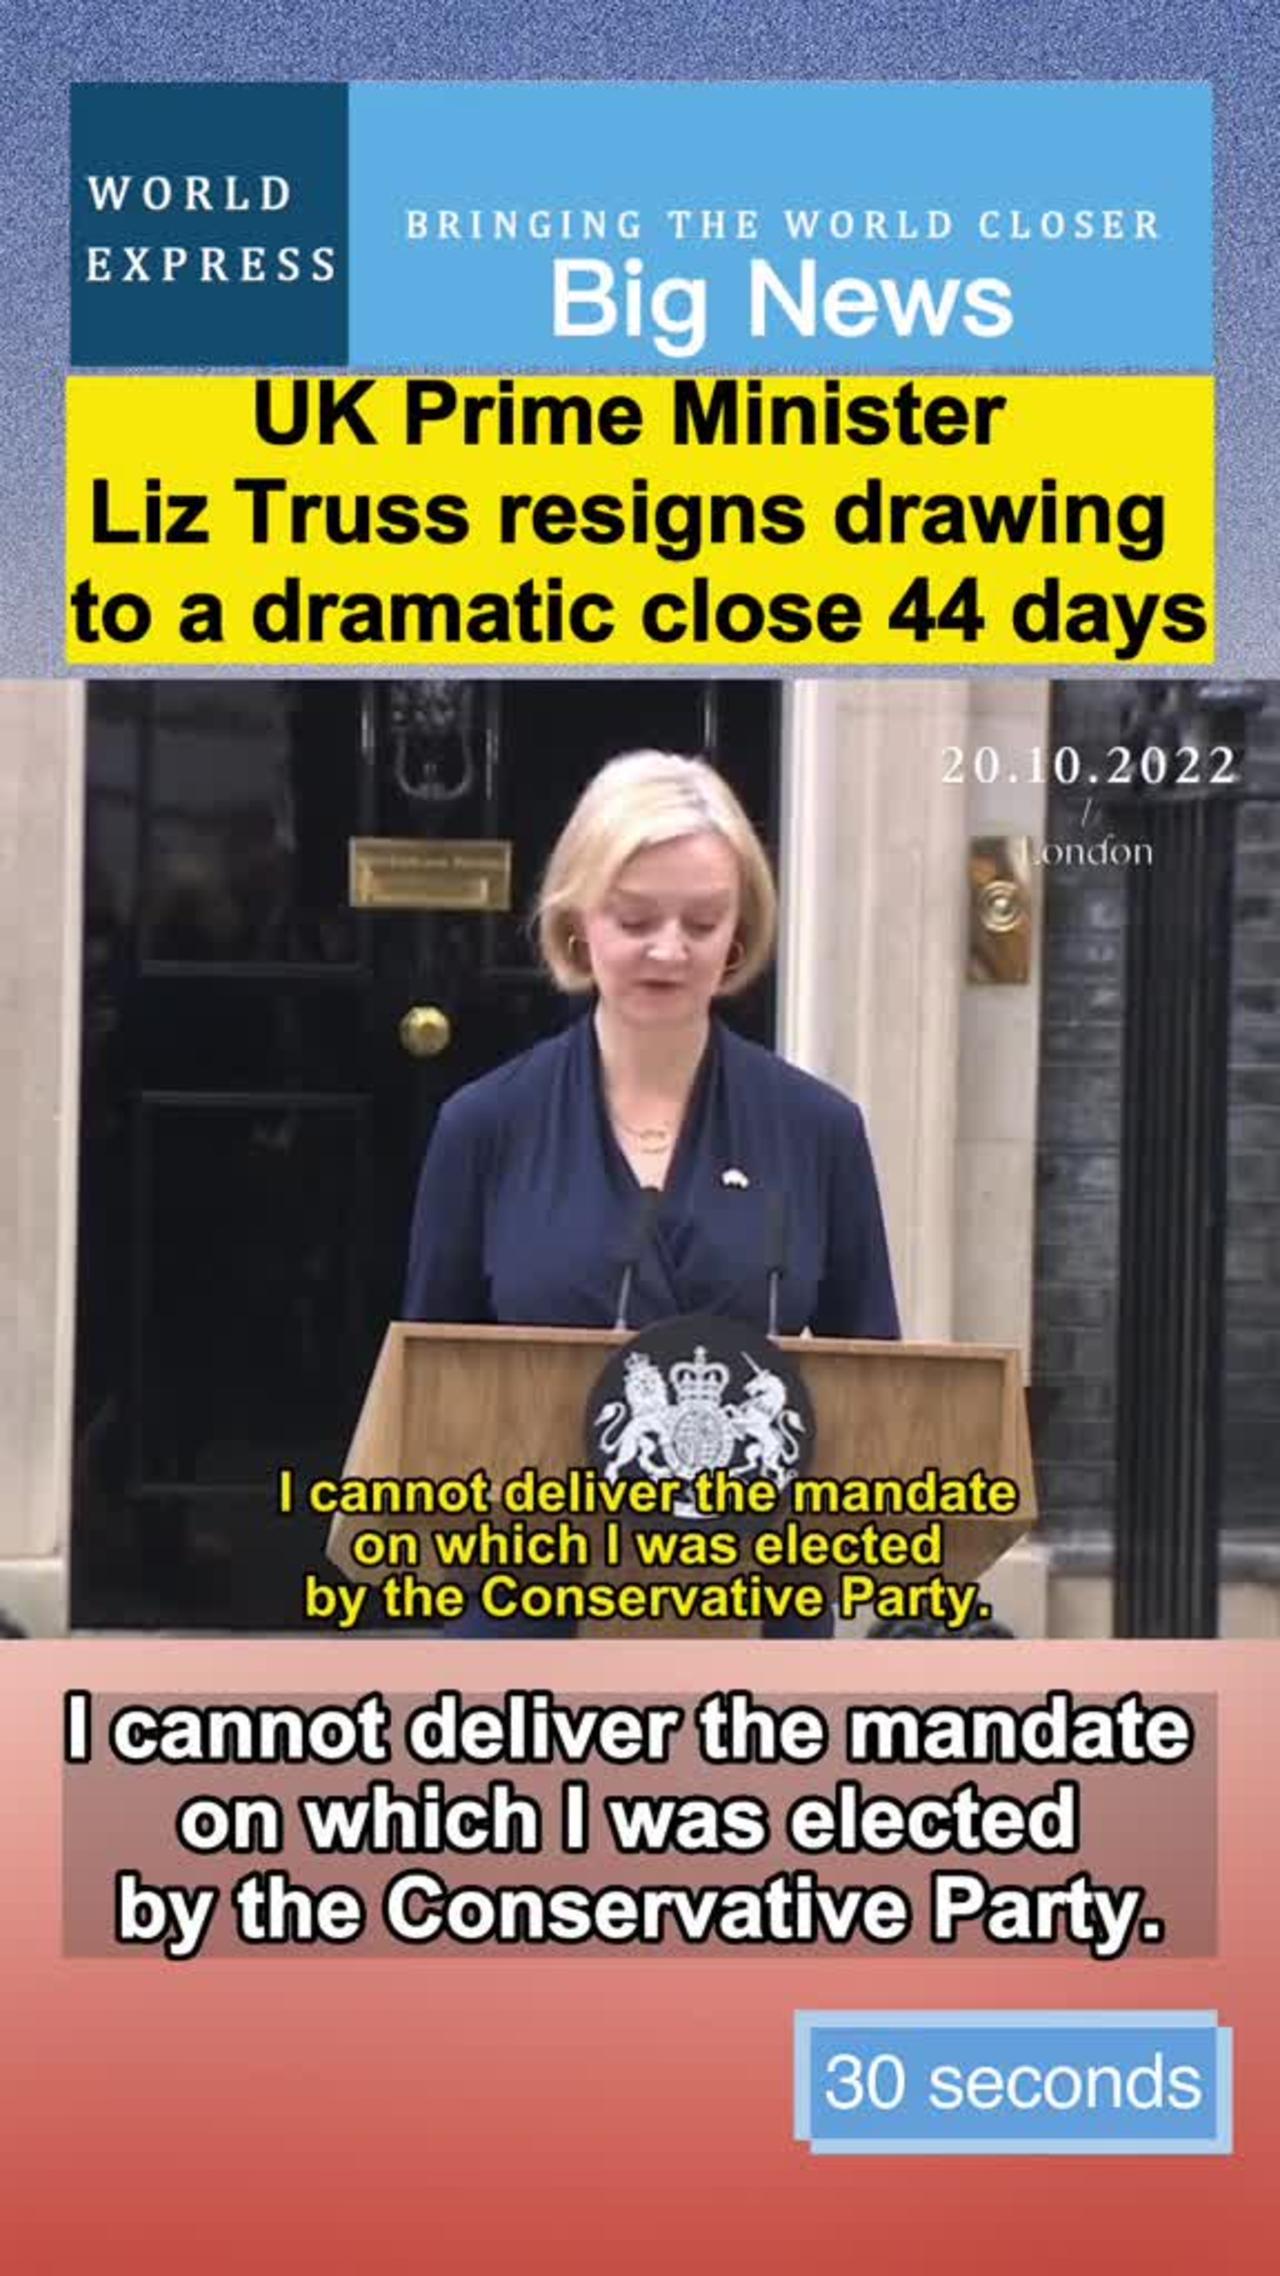 UK Prime Minister Liz Truss resigns drawing to a dramatic close 44 days1o1o